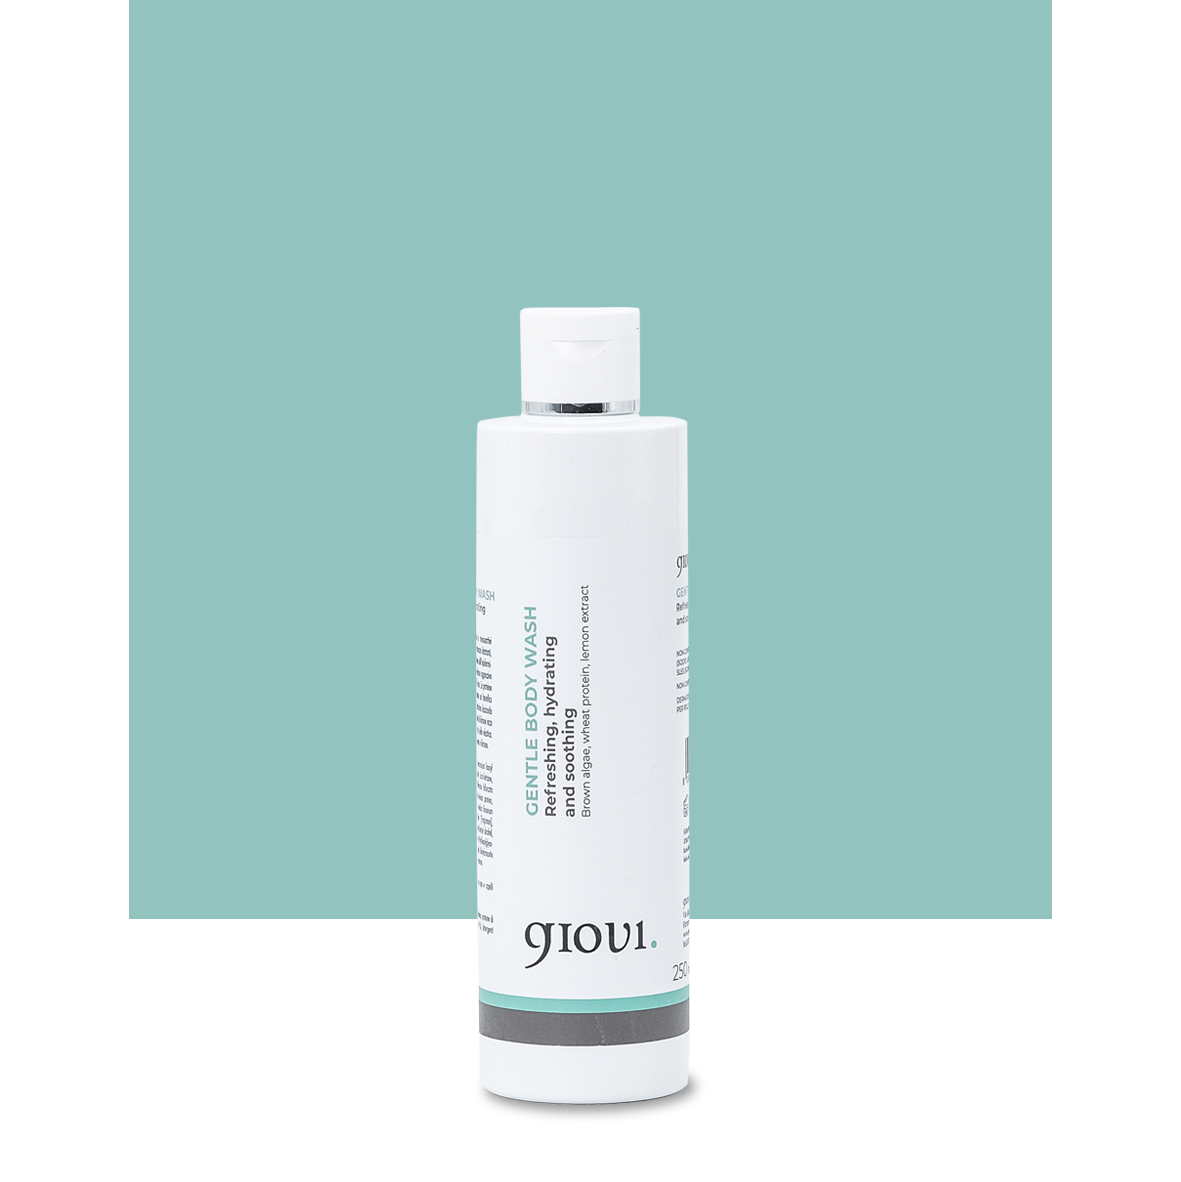 GENTLE BODY WASH Refreshing, hydrating and soothing